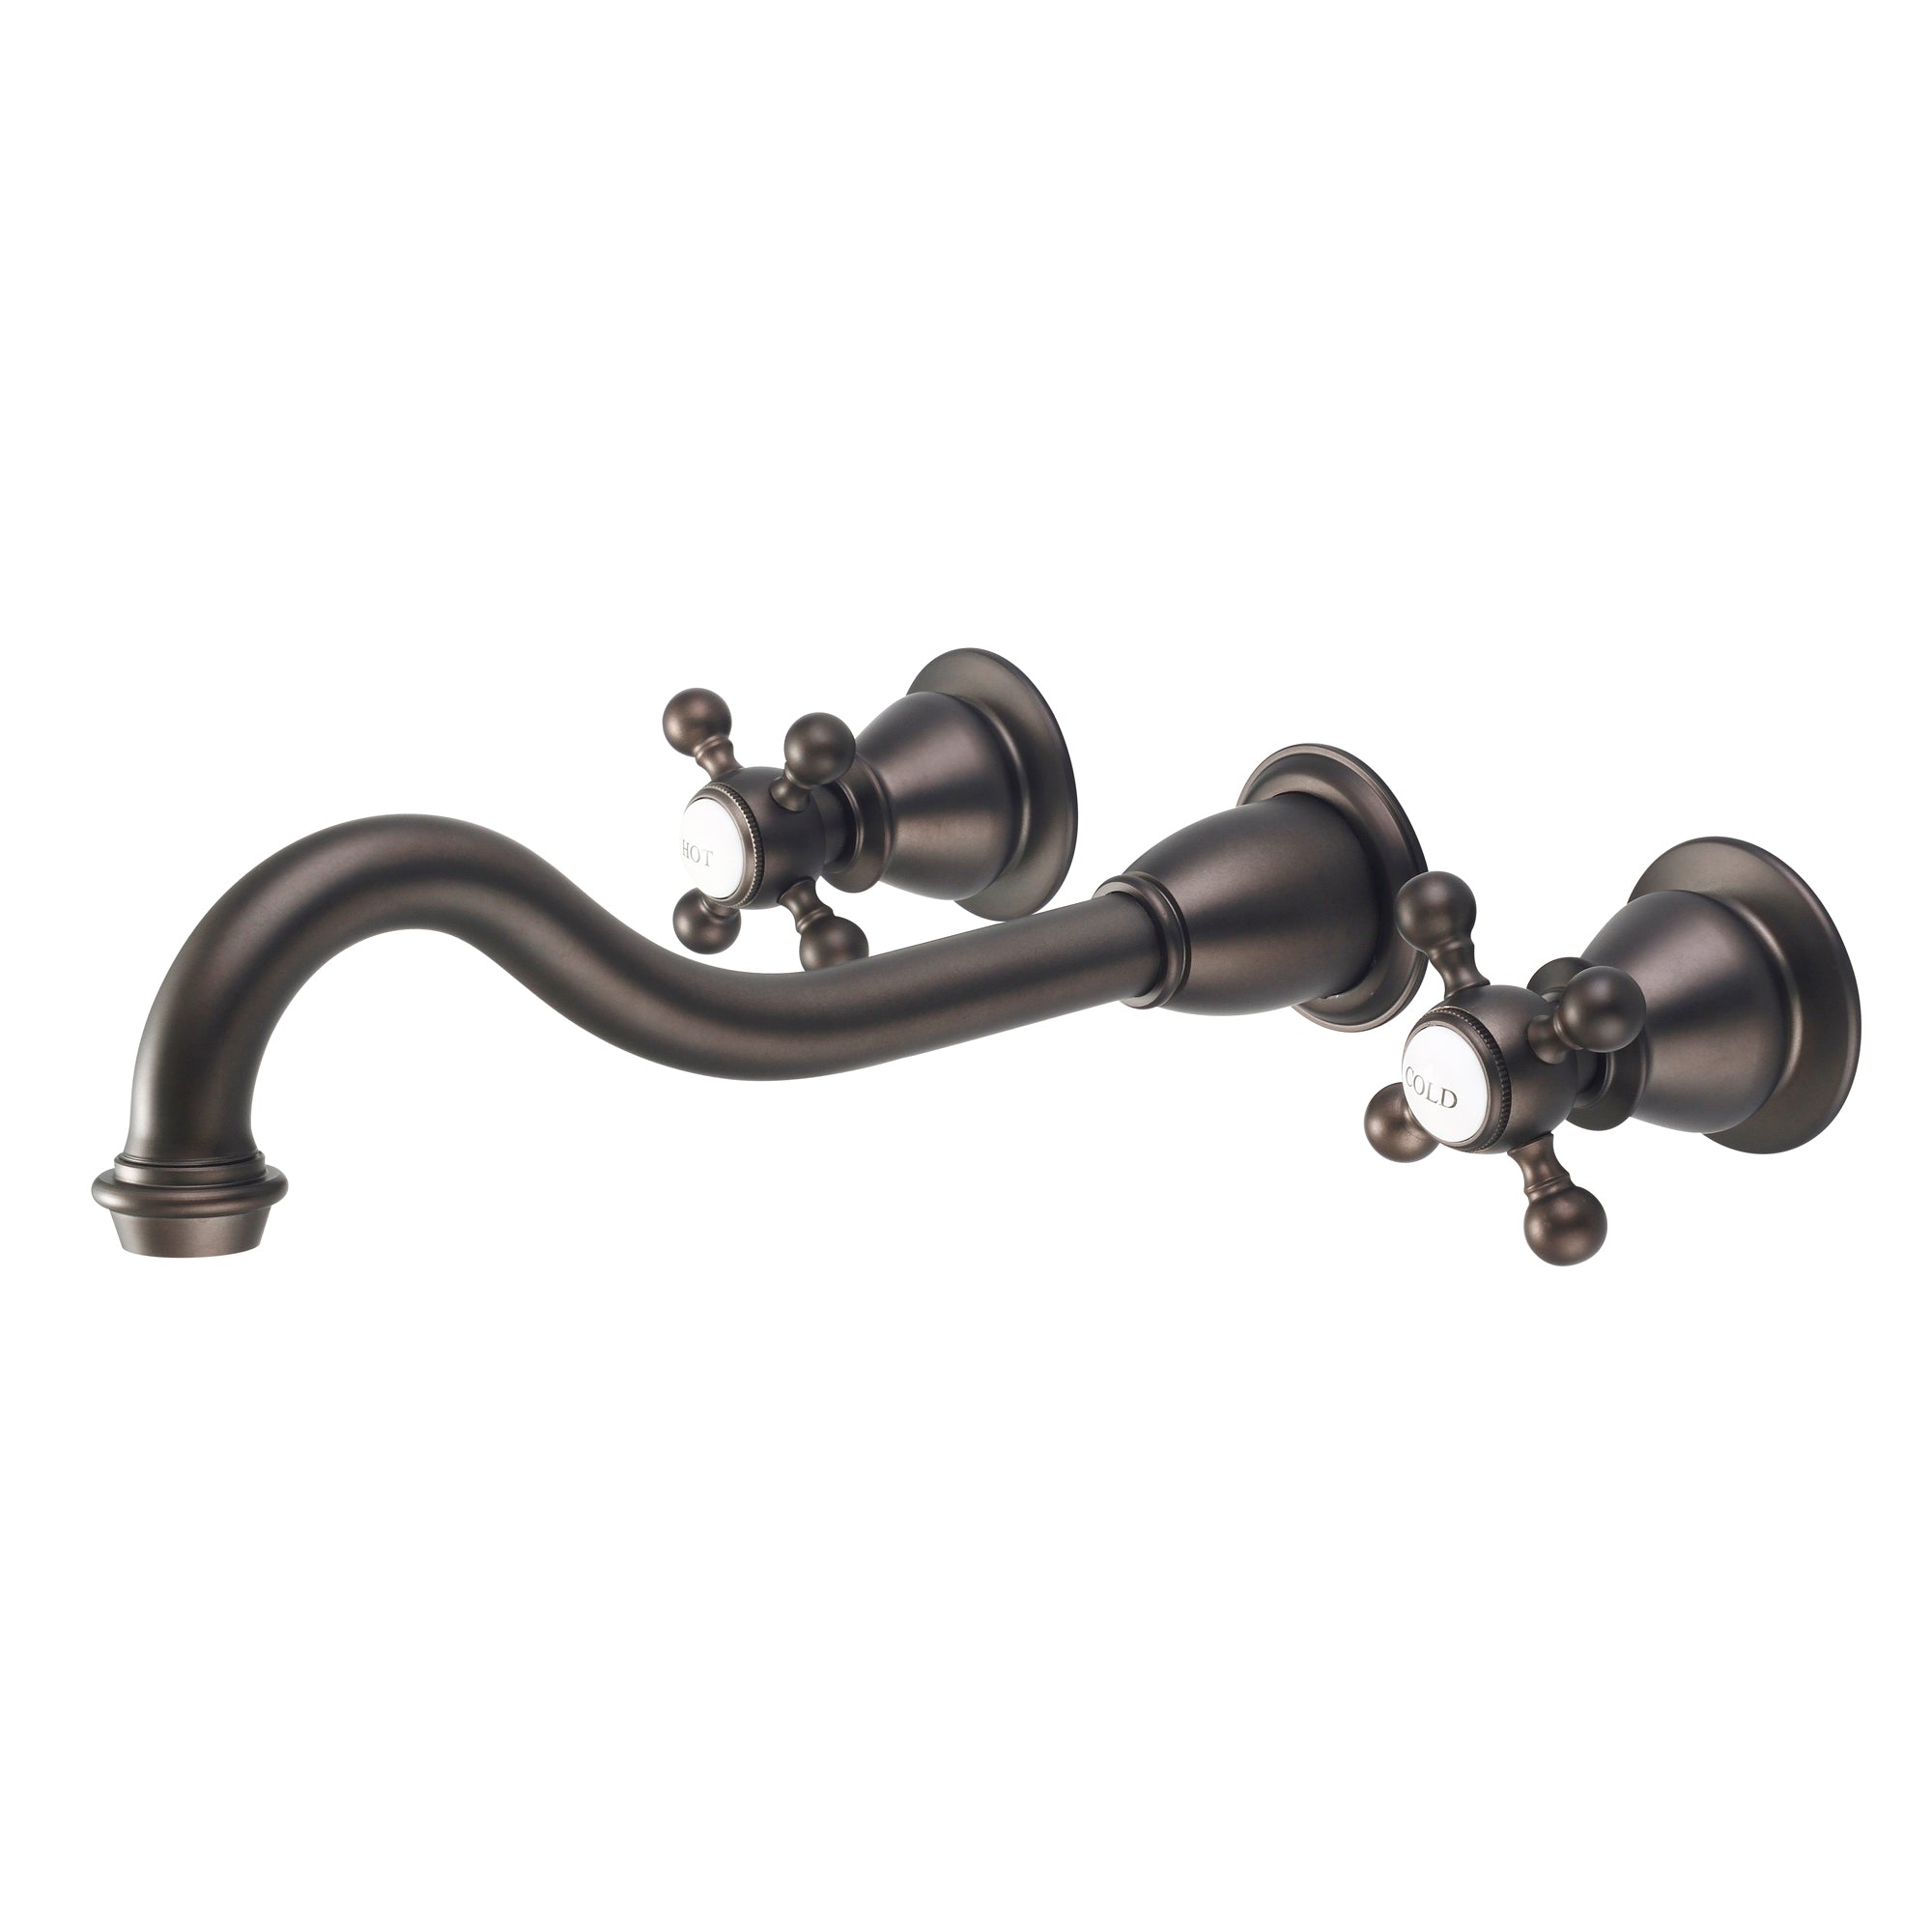 Water Creation | Elegant Spout Wall Mount Vessel/Lavatory Faucets in Oil-rubbed Bronze Finish Finish With Metal Lever Handles, Hot And Cold Labels Included | F4-0001-03-BX